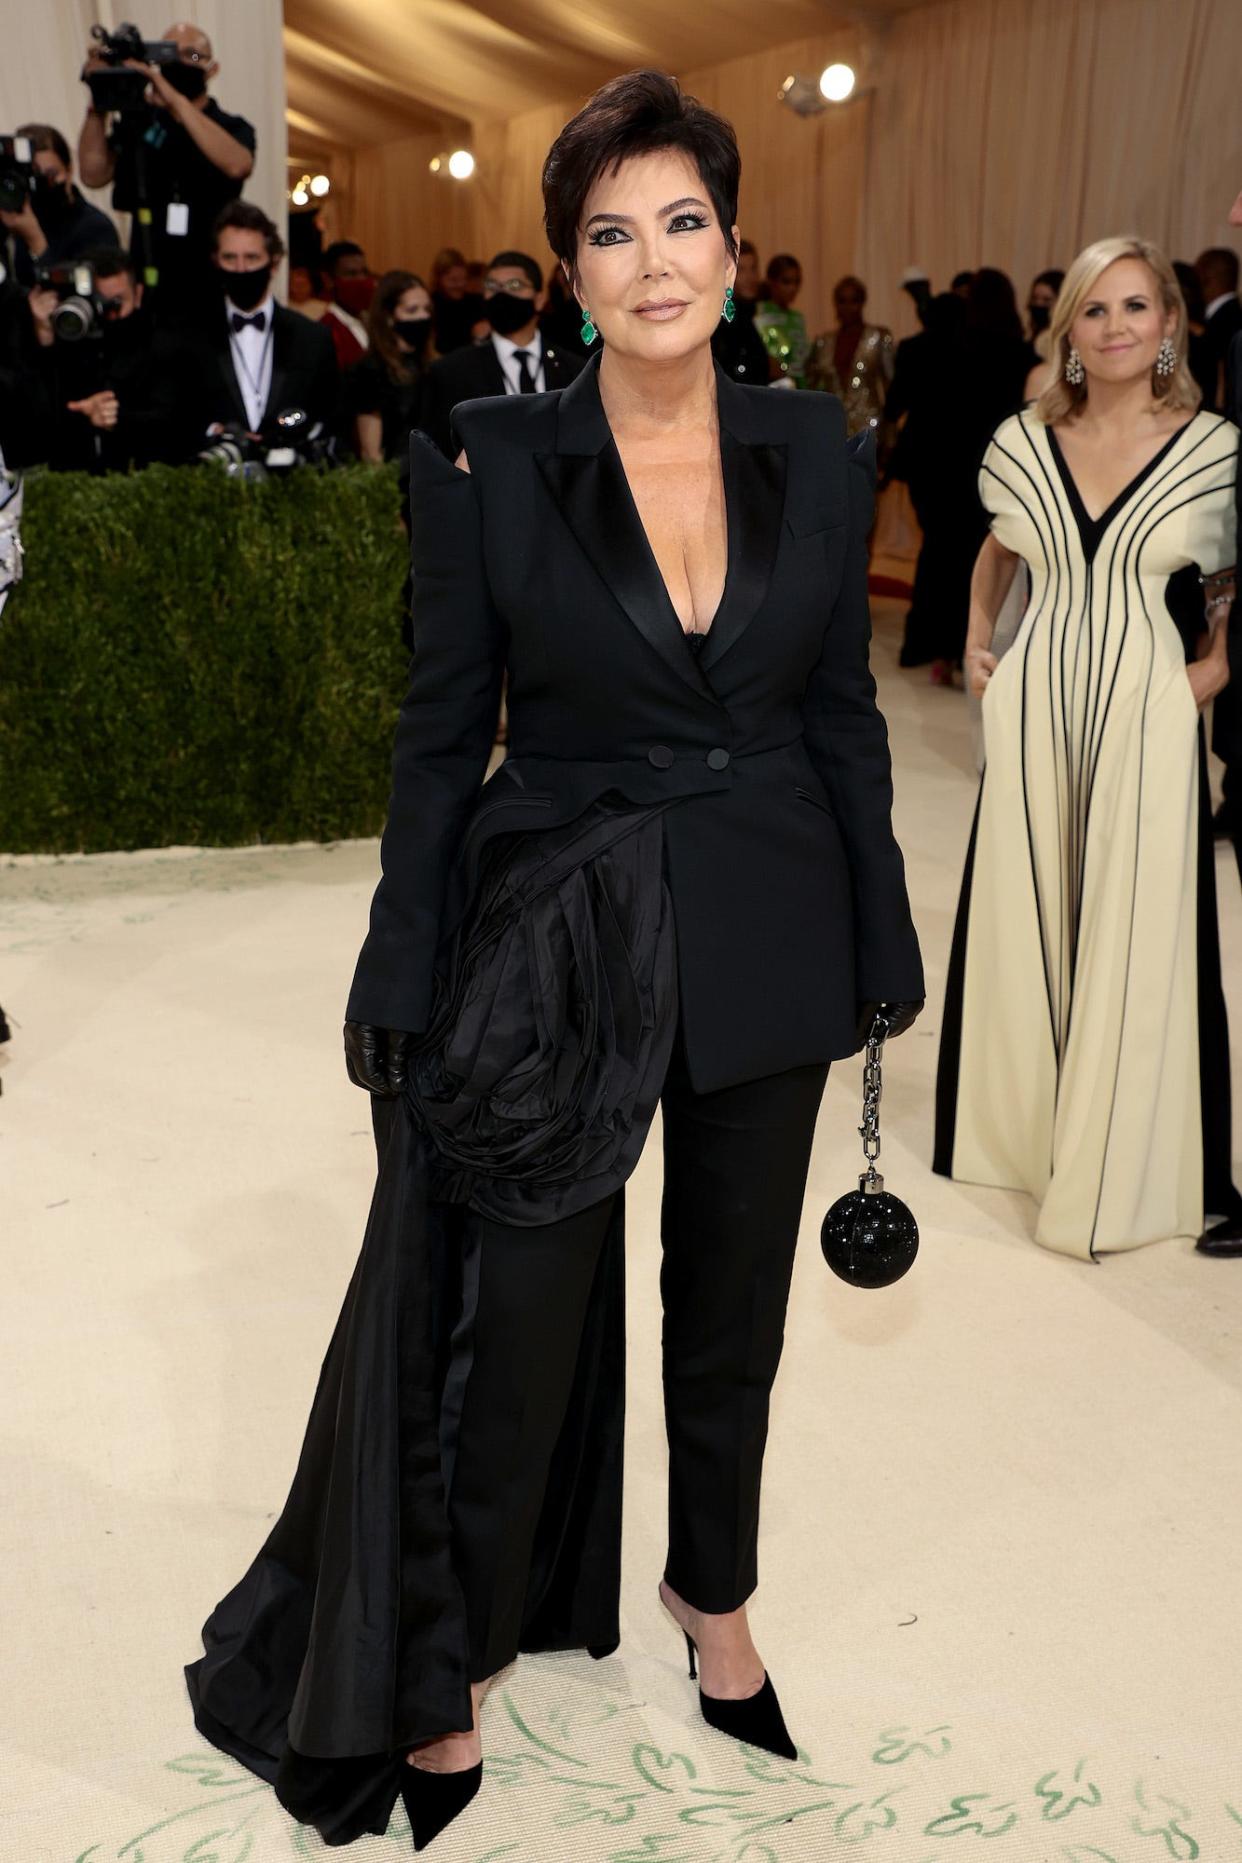 Kris Jenner attends the 2021 Met Gala wearing a black suit with a floral applique and plunging neckline. She accessorized with emerald earrings and a cannonball-shaped clutch.